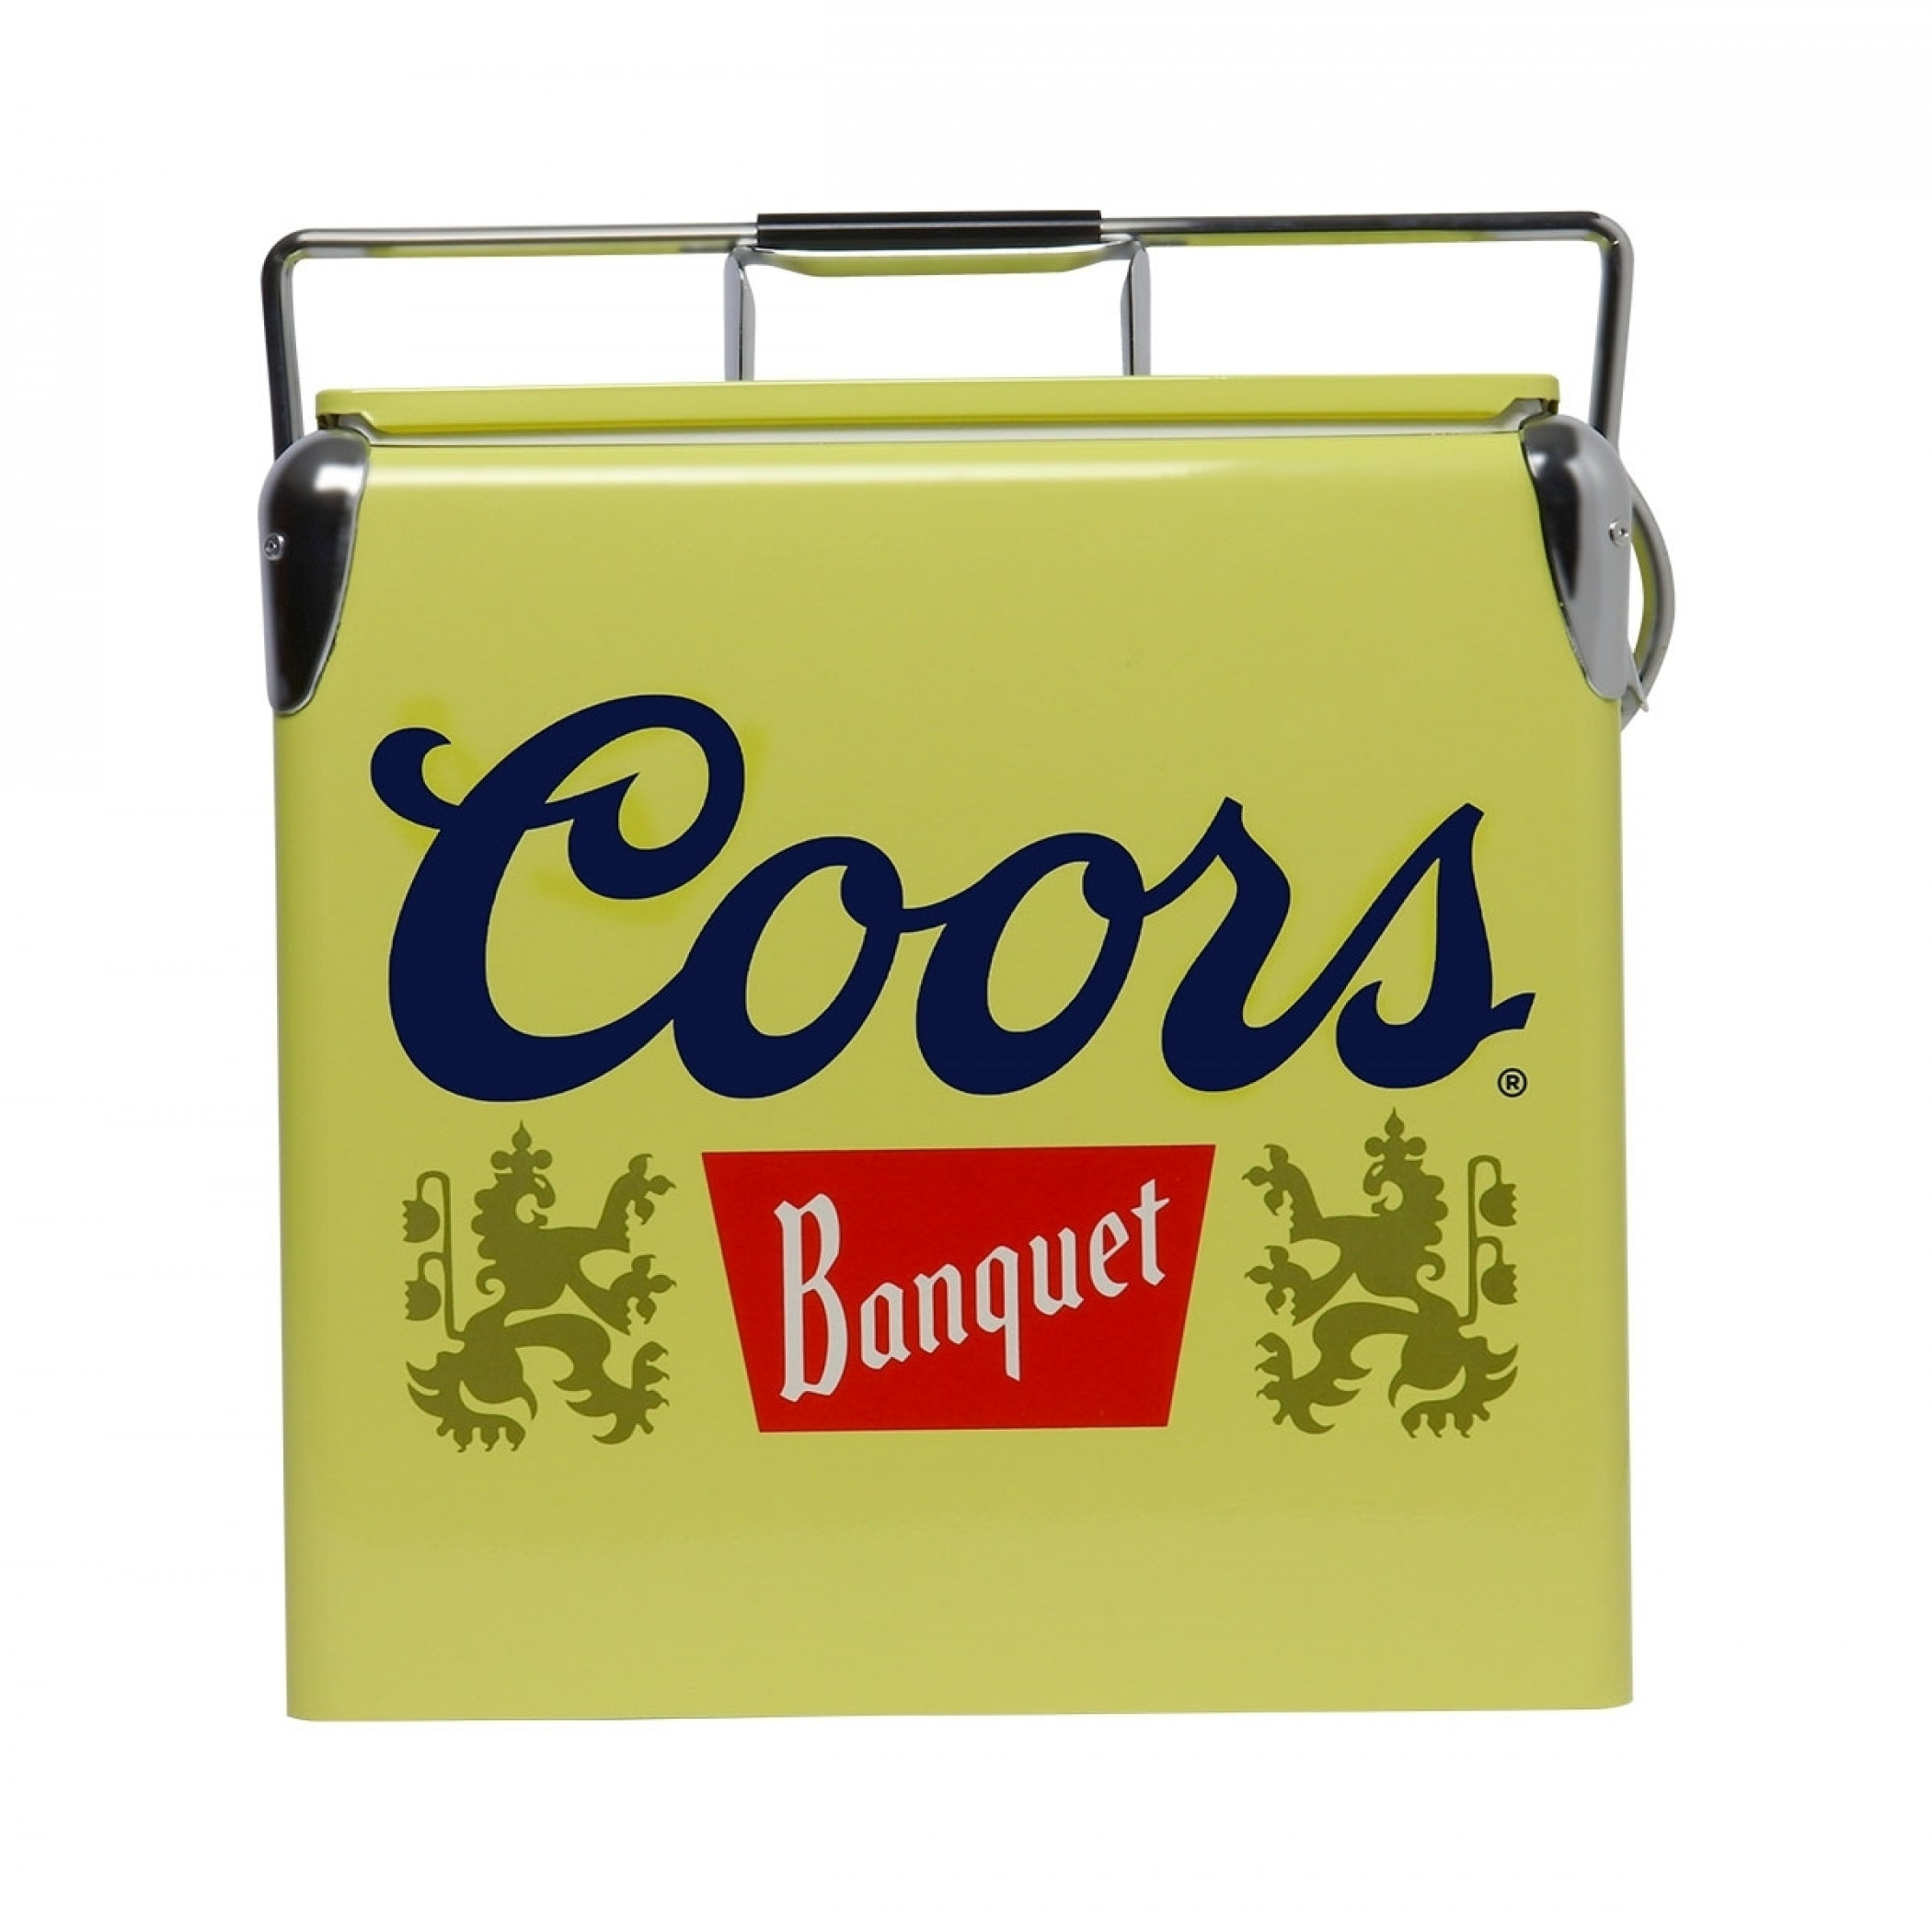 https://mmv2api.s3.us-east-2.amazonaws.com/products/images/0003840_coors-banquet-retro-ice-chest-cooler-with-bottle-opener-13l.jpeg